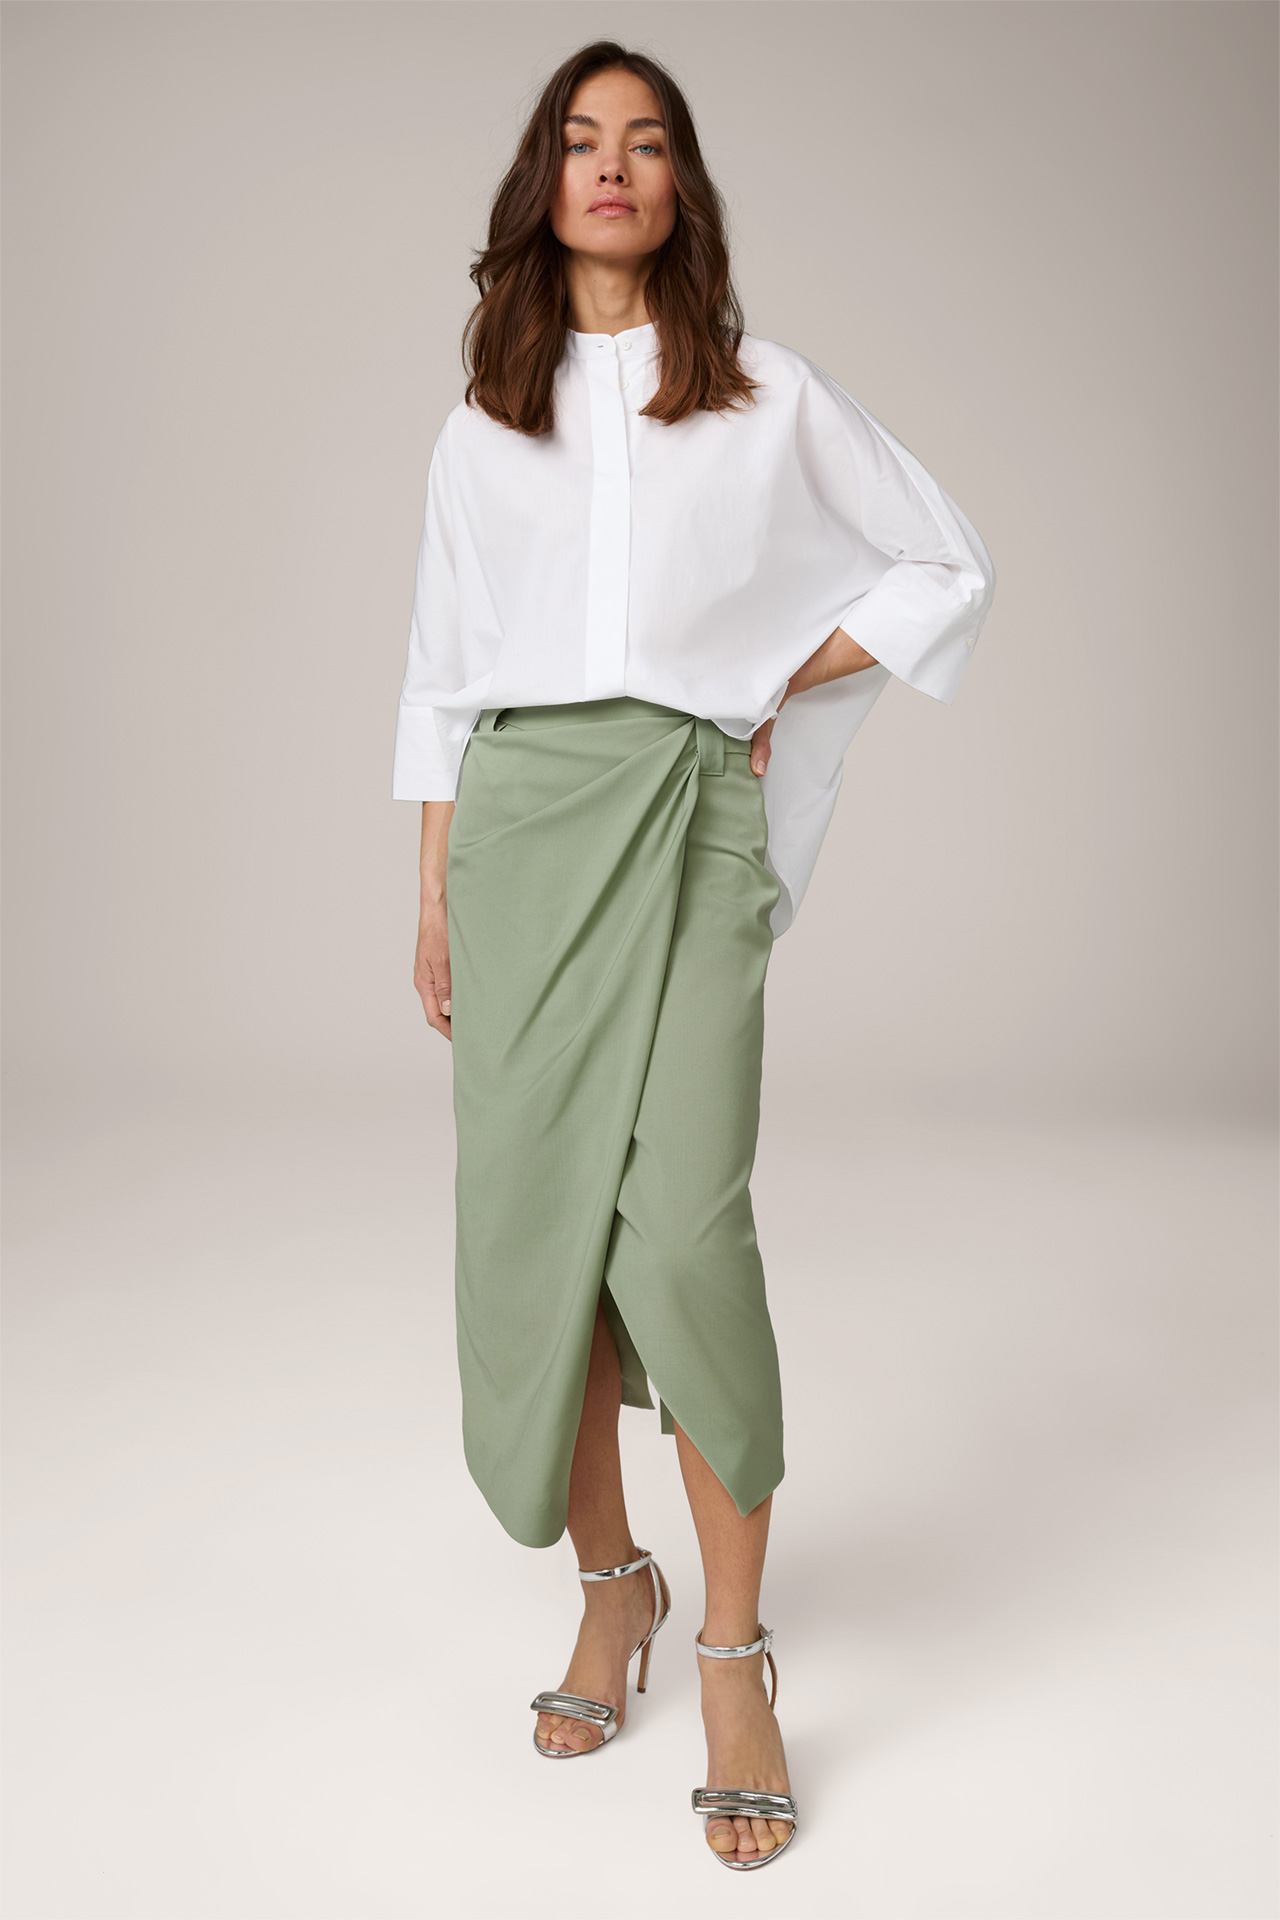 Virgin Wool Midi Length Skirt with Wrapover in Sage